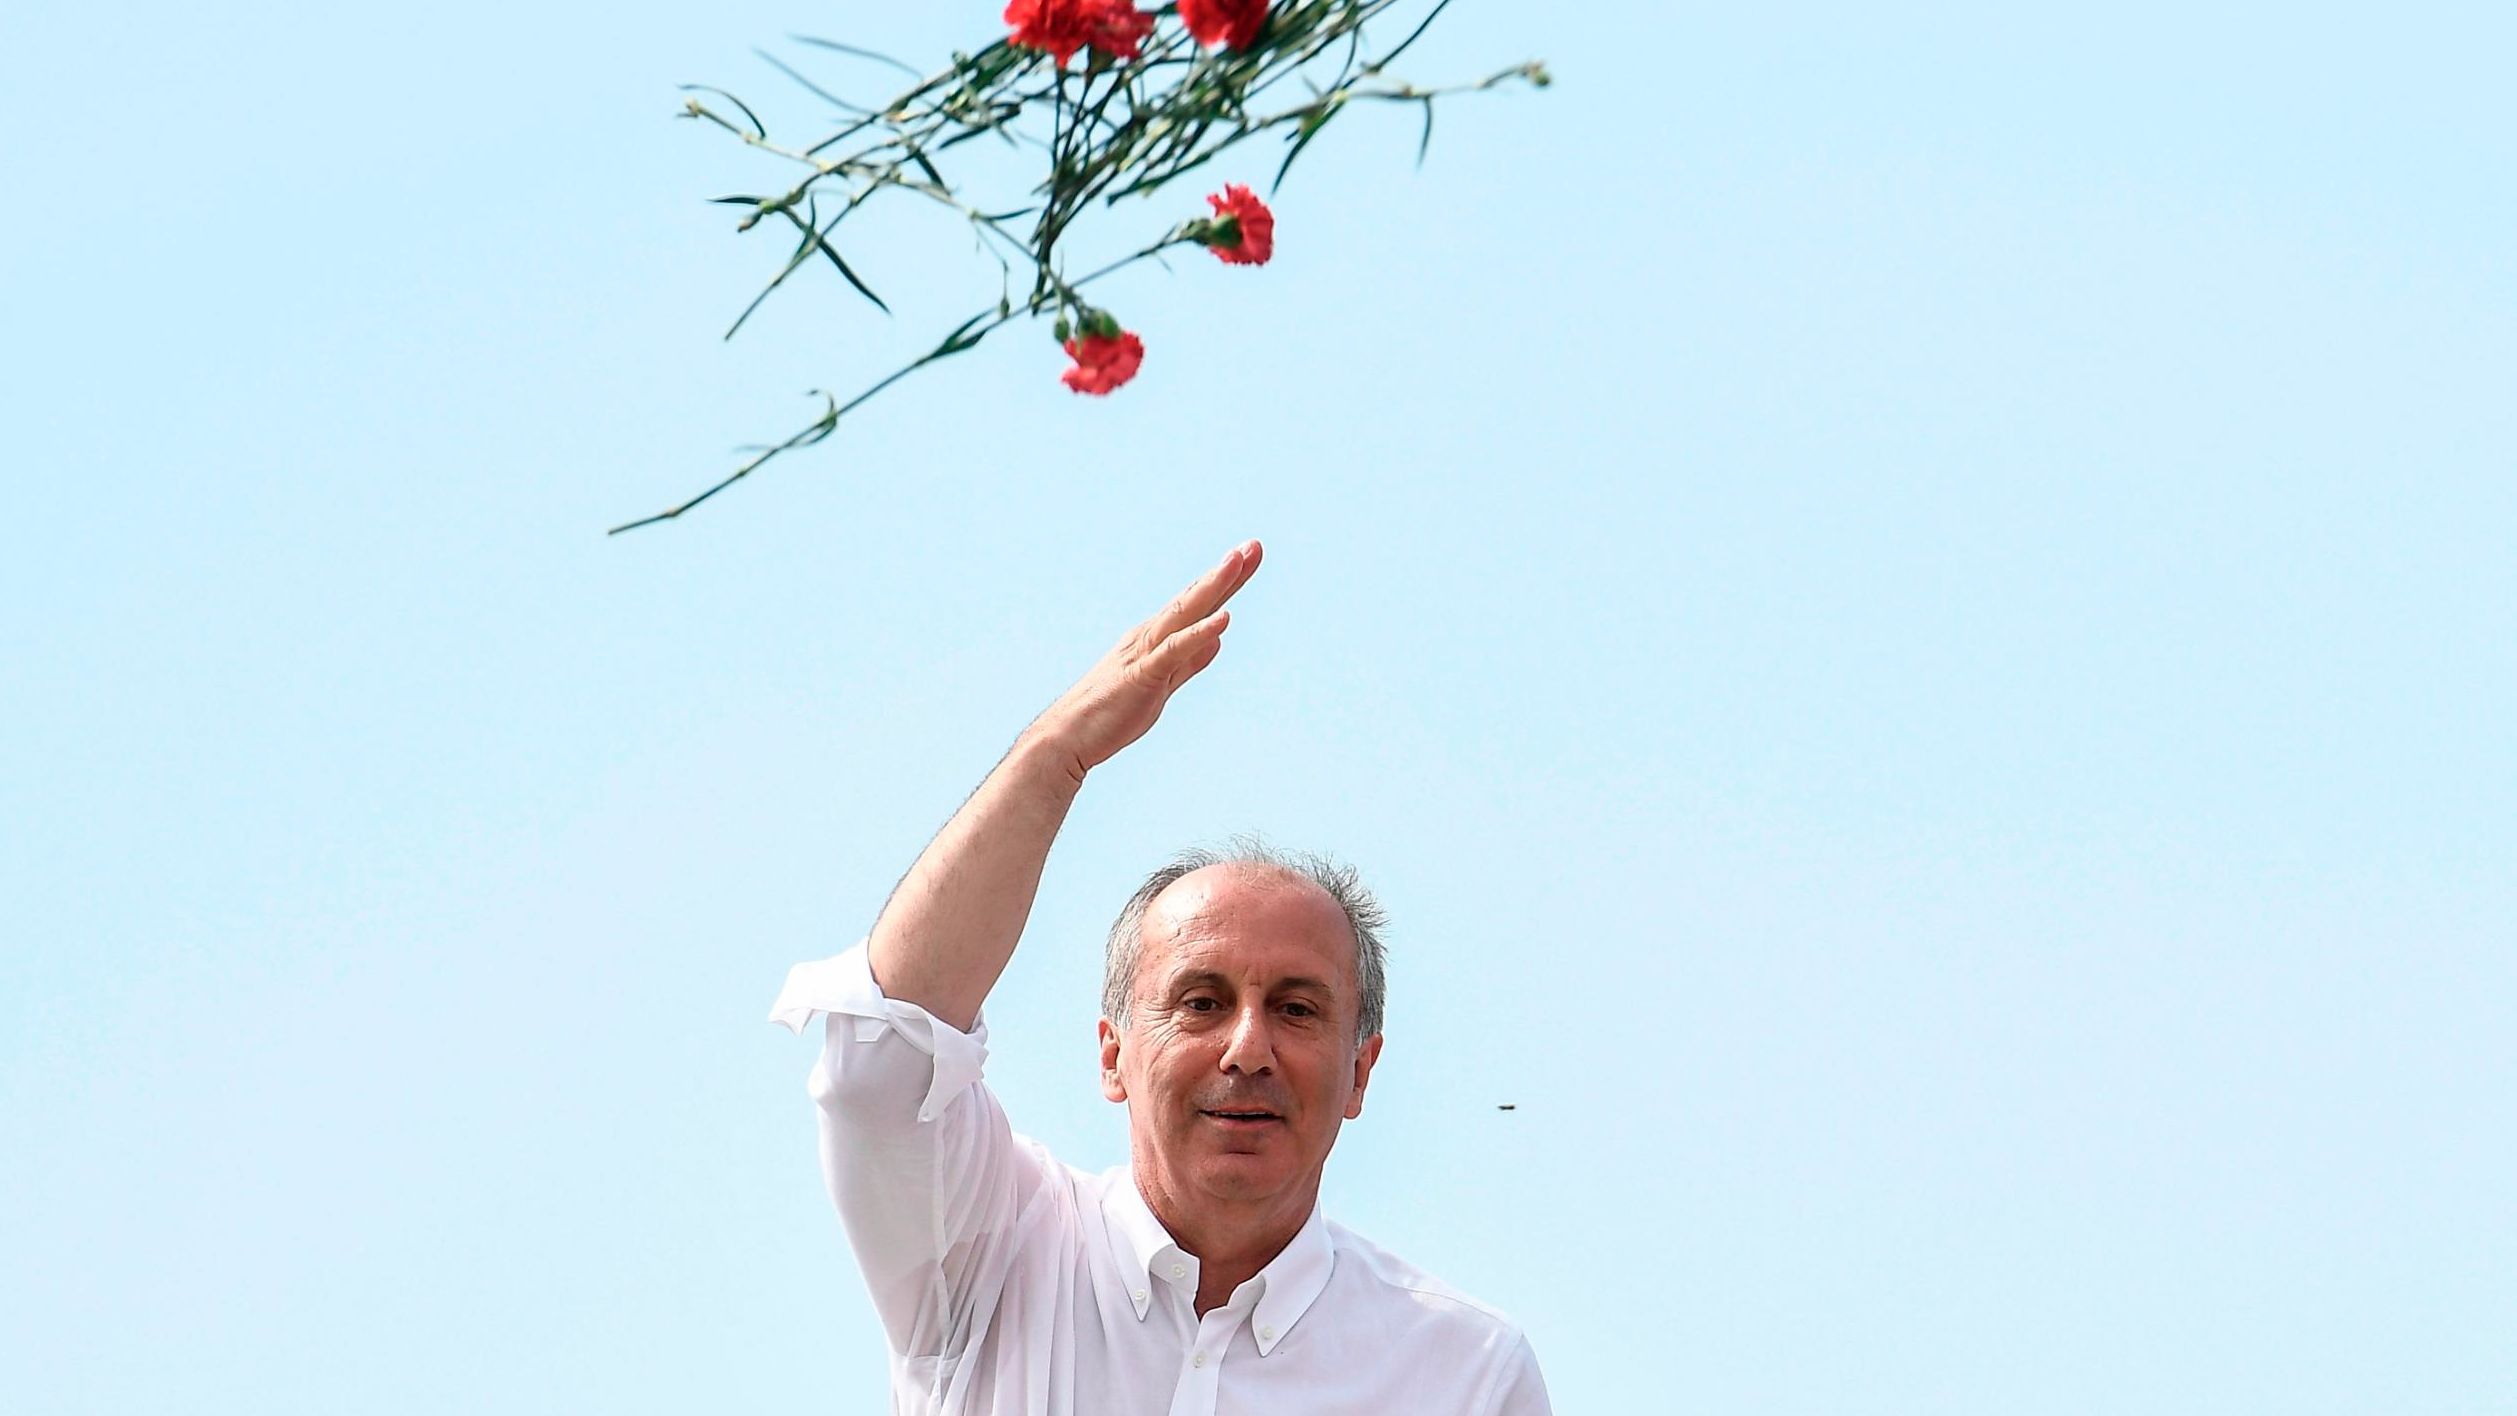 Presidential candidate Muharrem Ince throws carnations to his supporters at an election event in Istanbul on June 16.